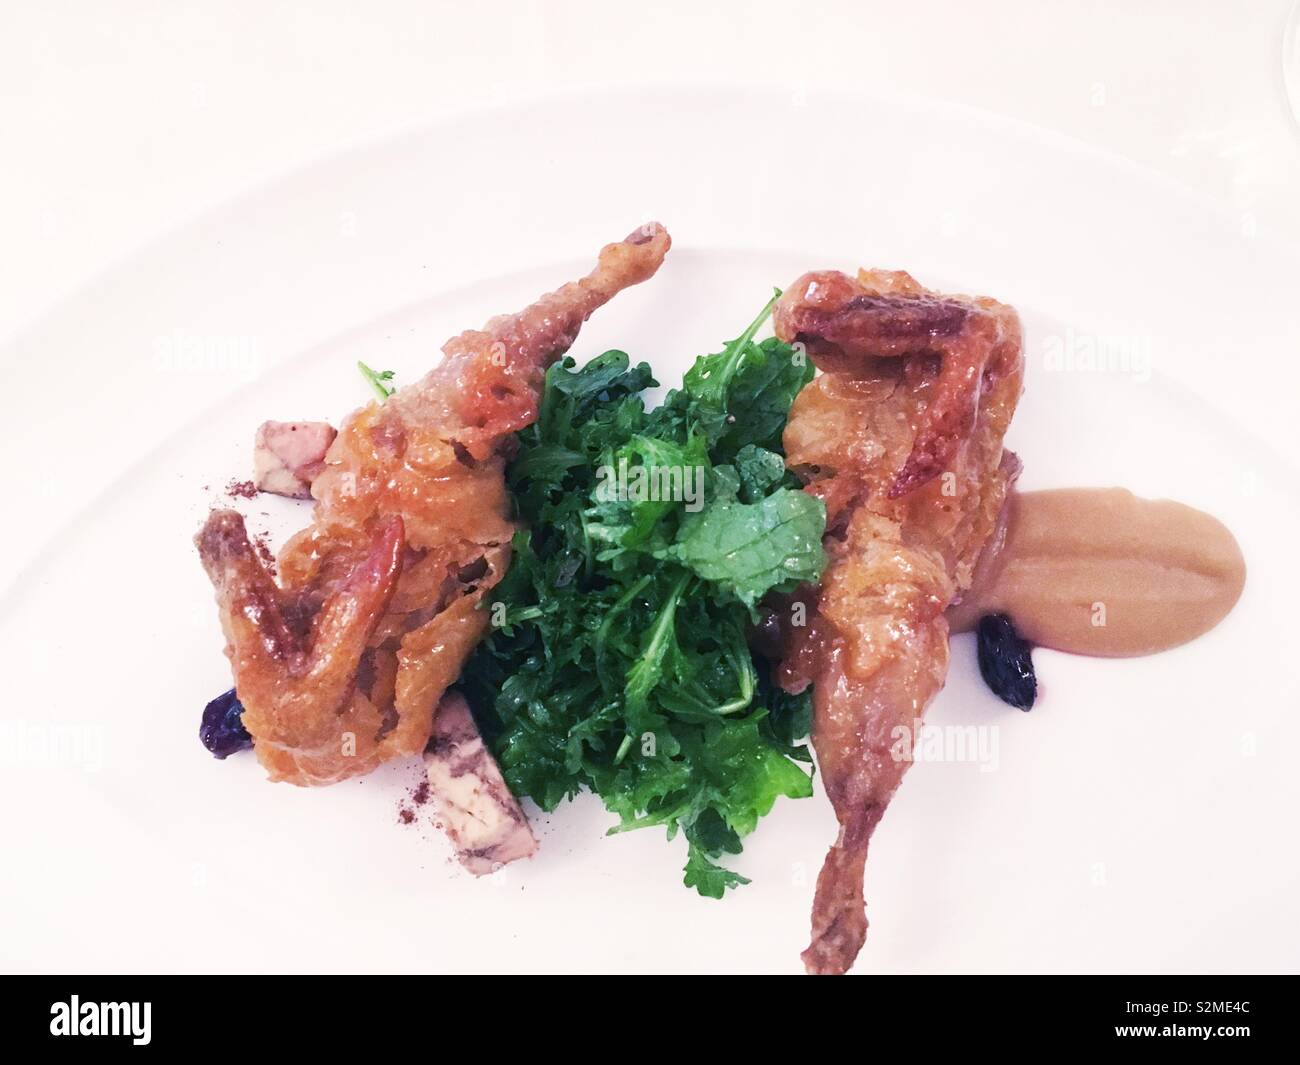 Roasted quail on a plate Stock Photo